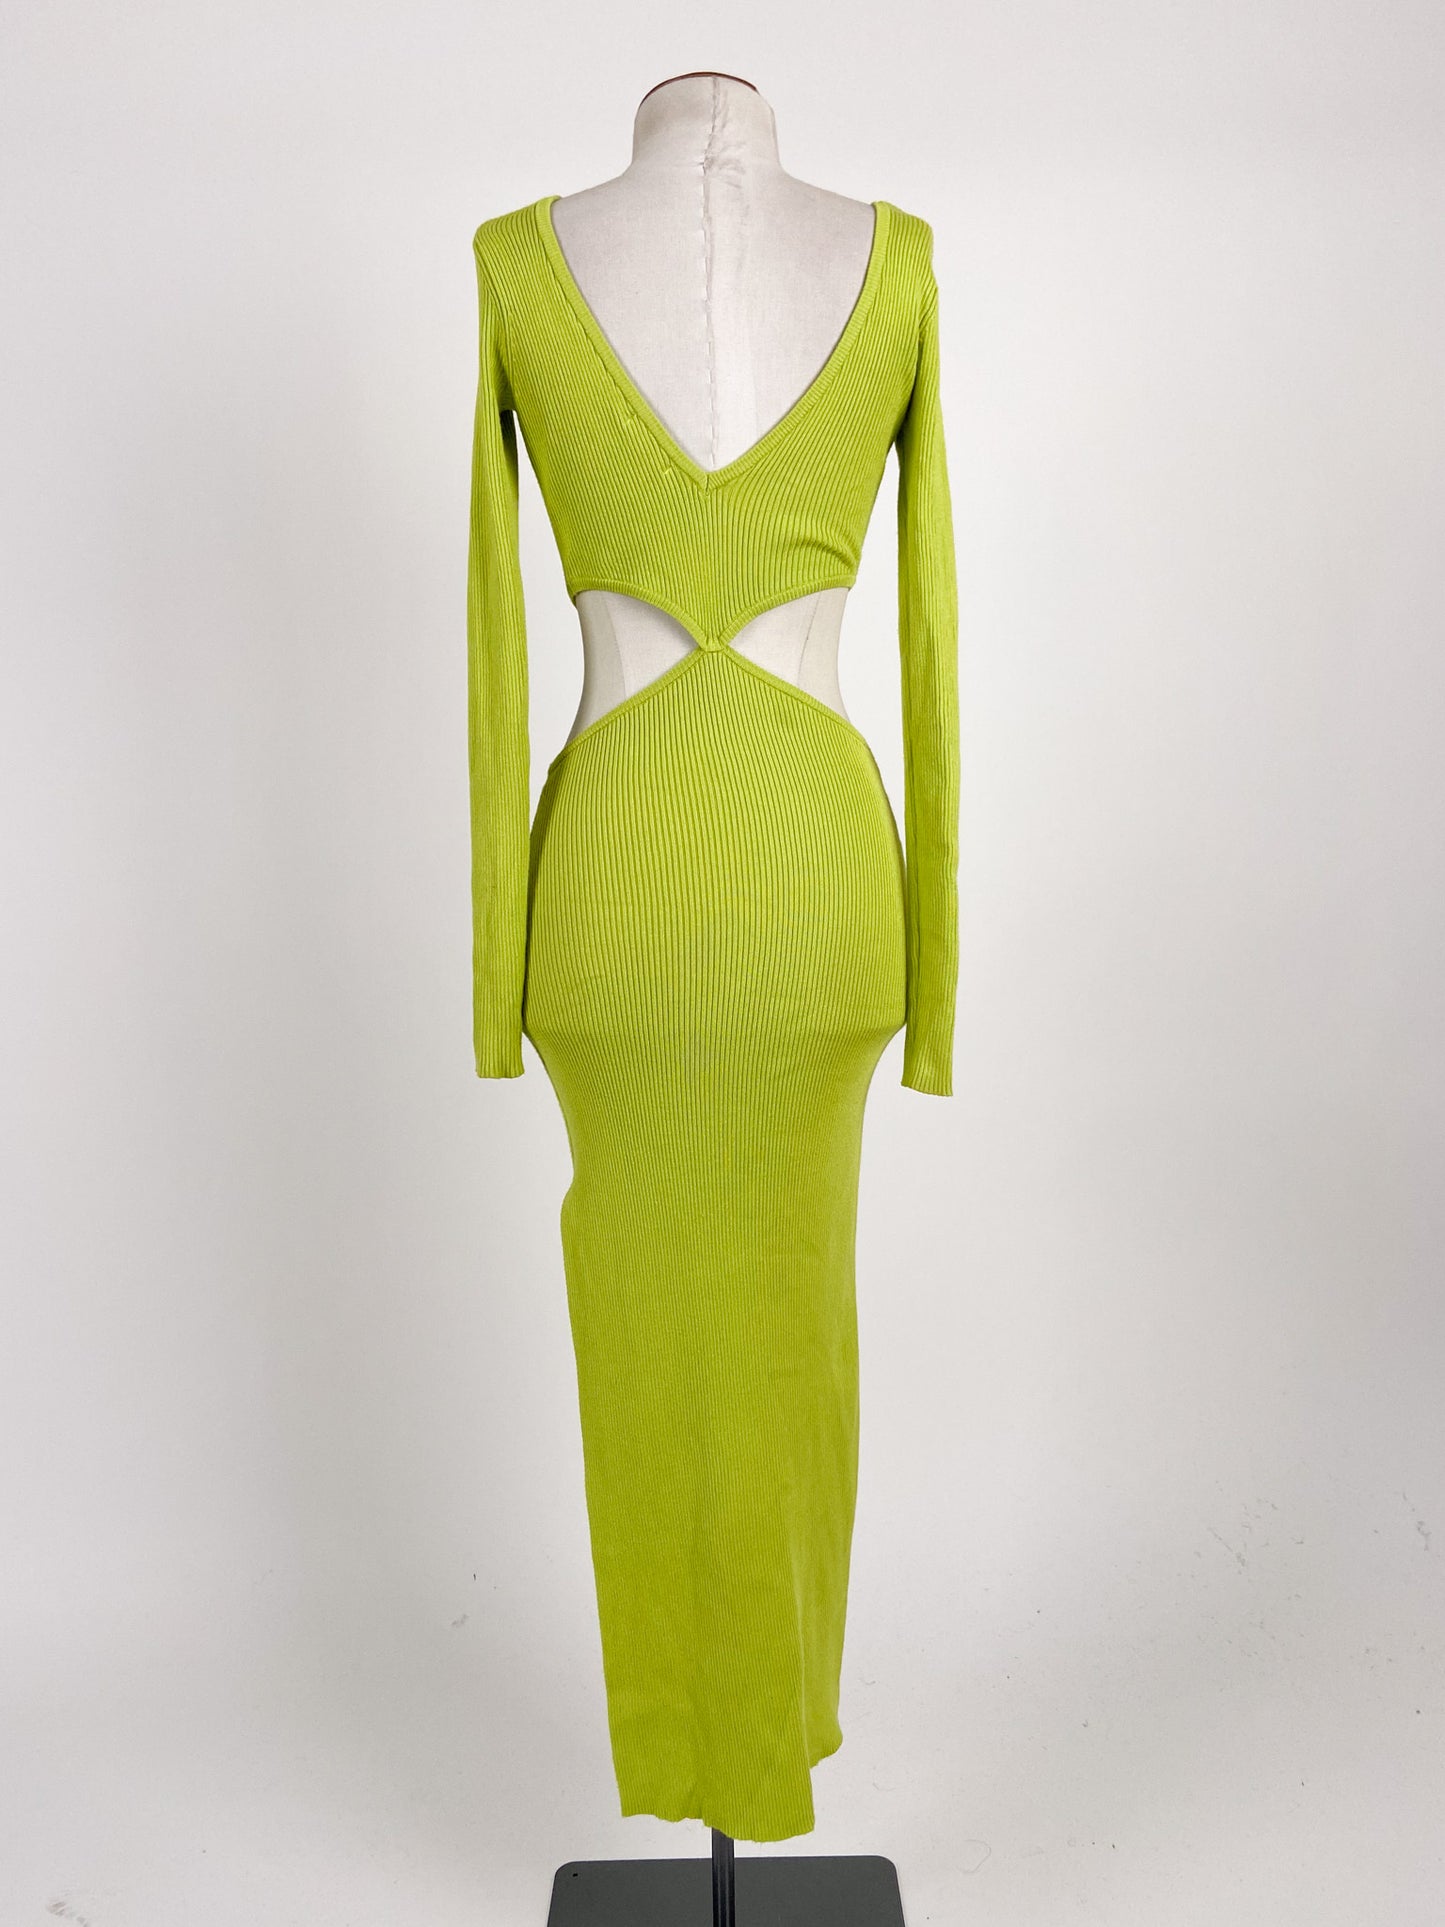 Glassons | Green Cocktail/Formal Dress | Size XS